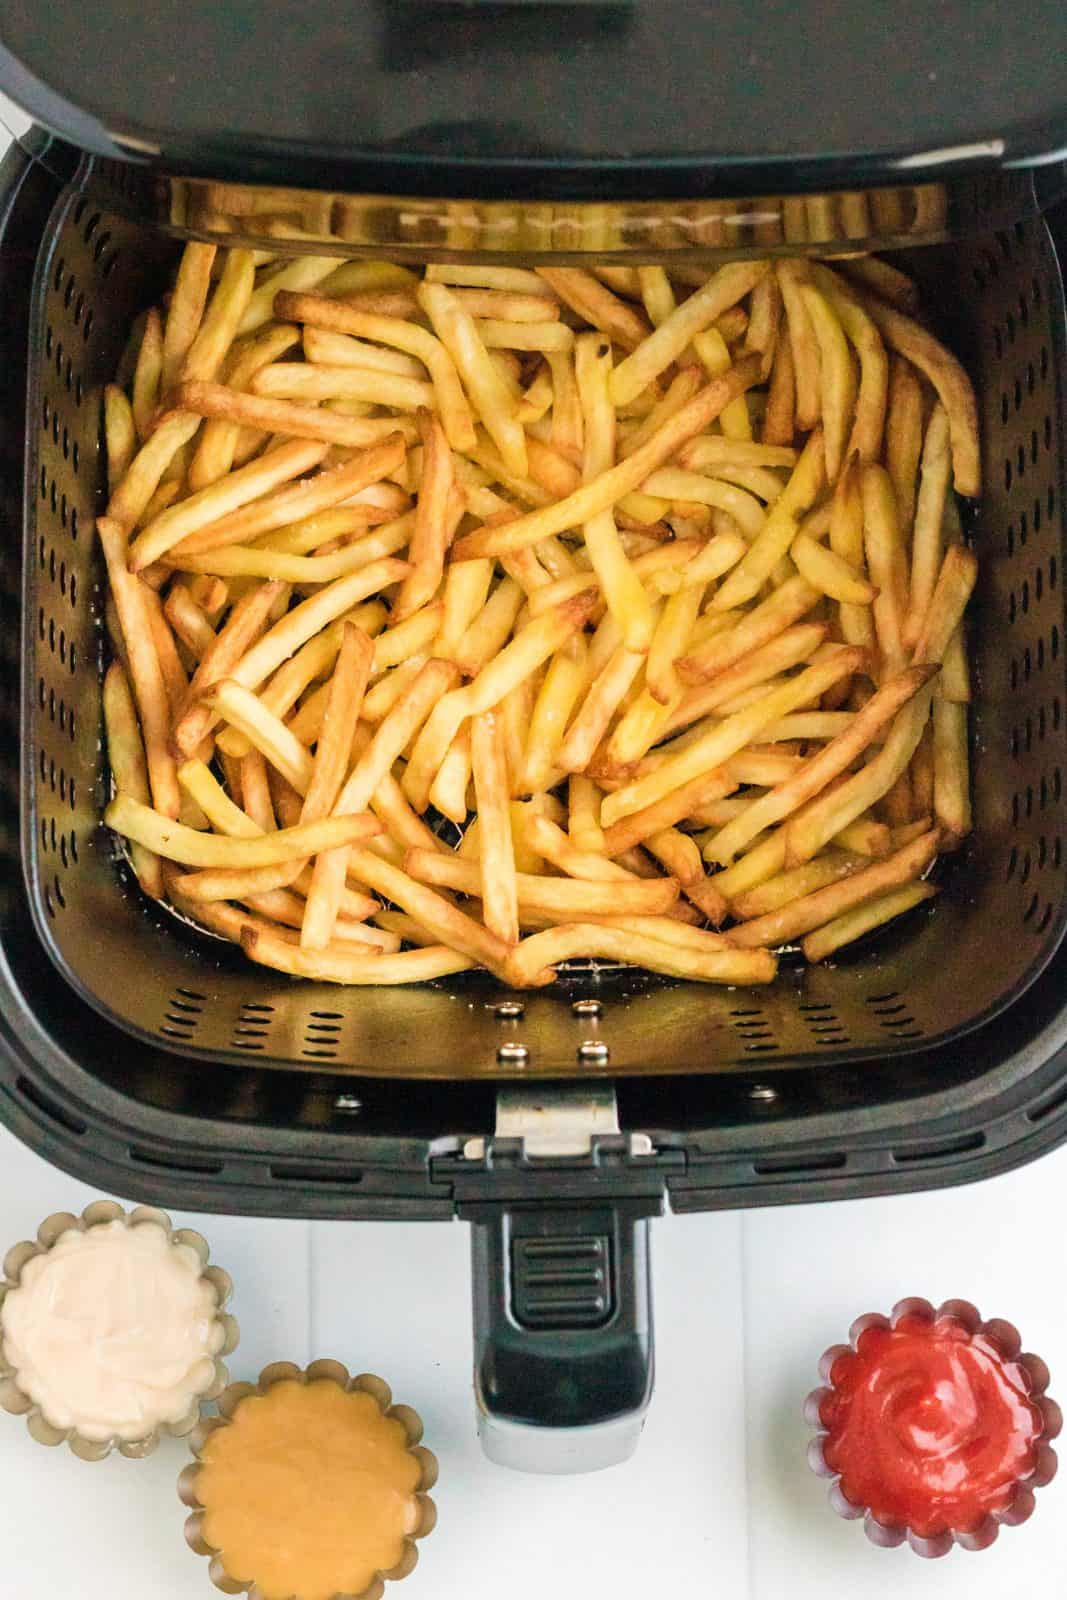 Crispy finished french fries in air fryer basket.